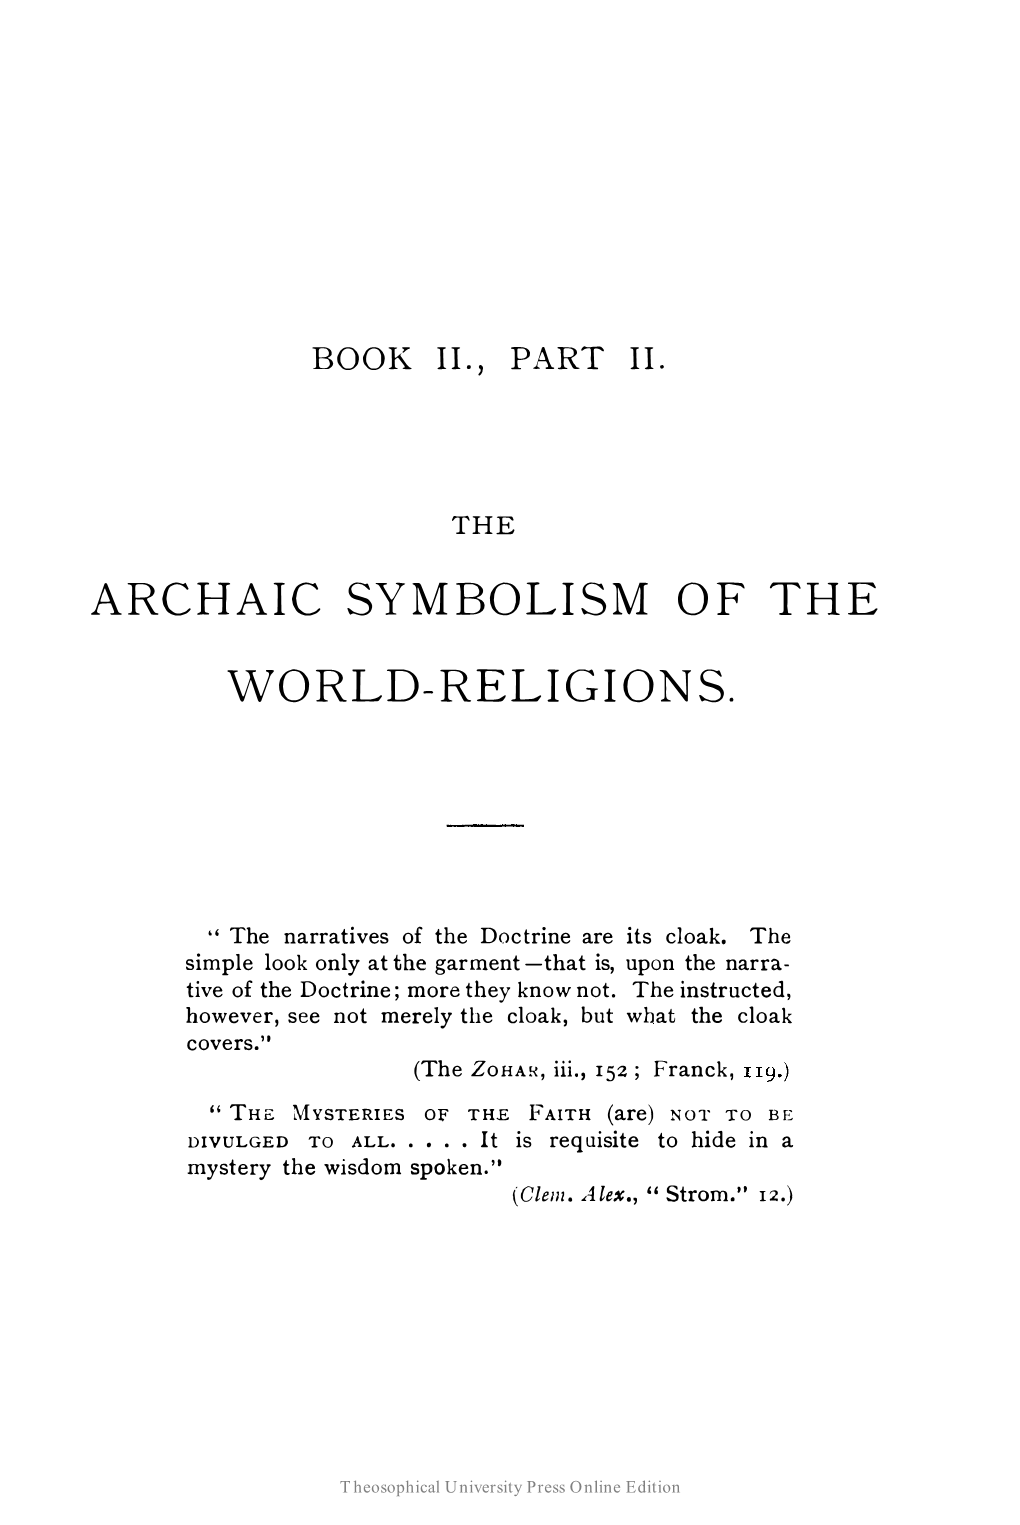 Archaic Symbolism of the World-Religions